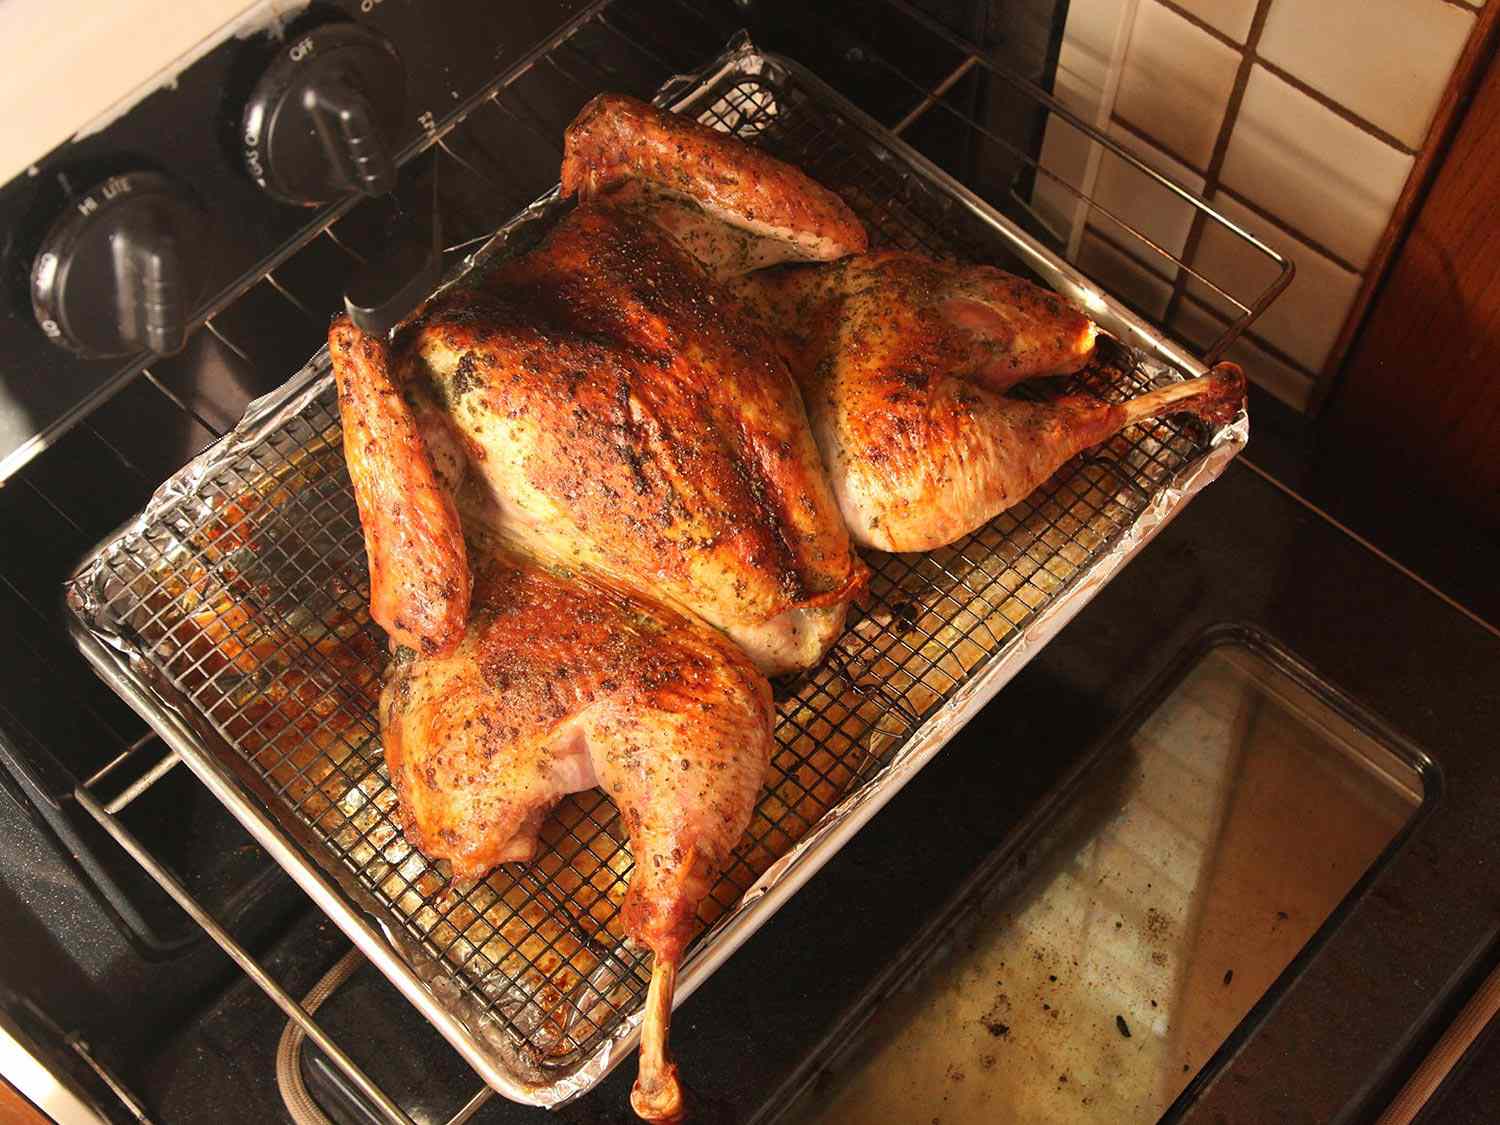 Spatchcocked roasted turkey being pulled from an oven